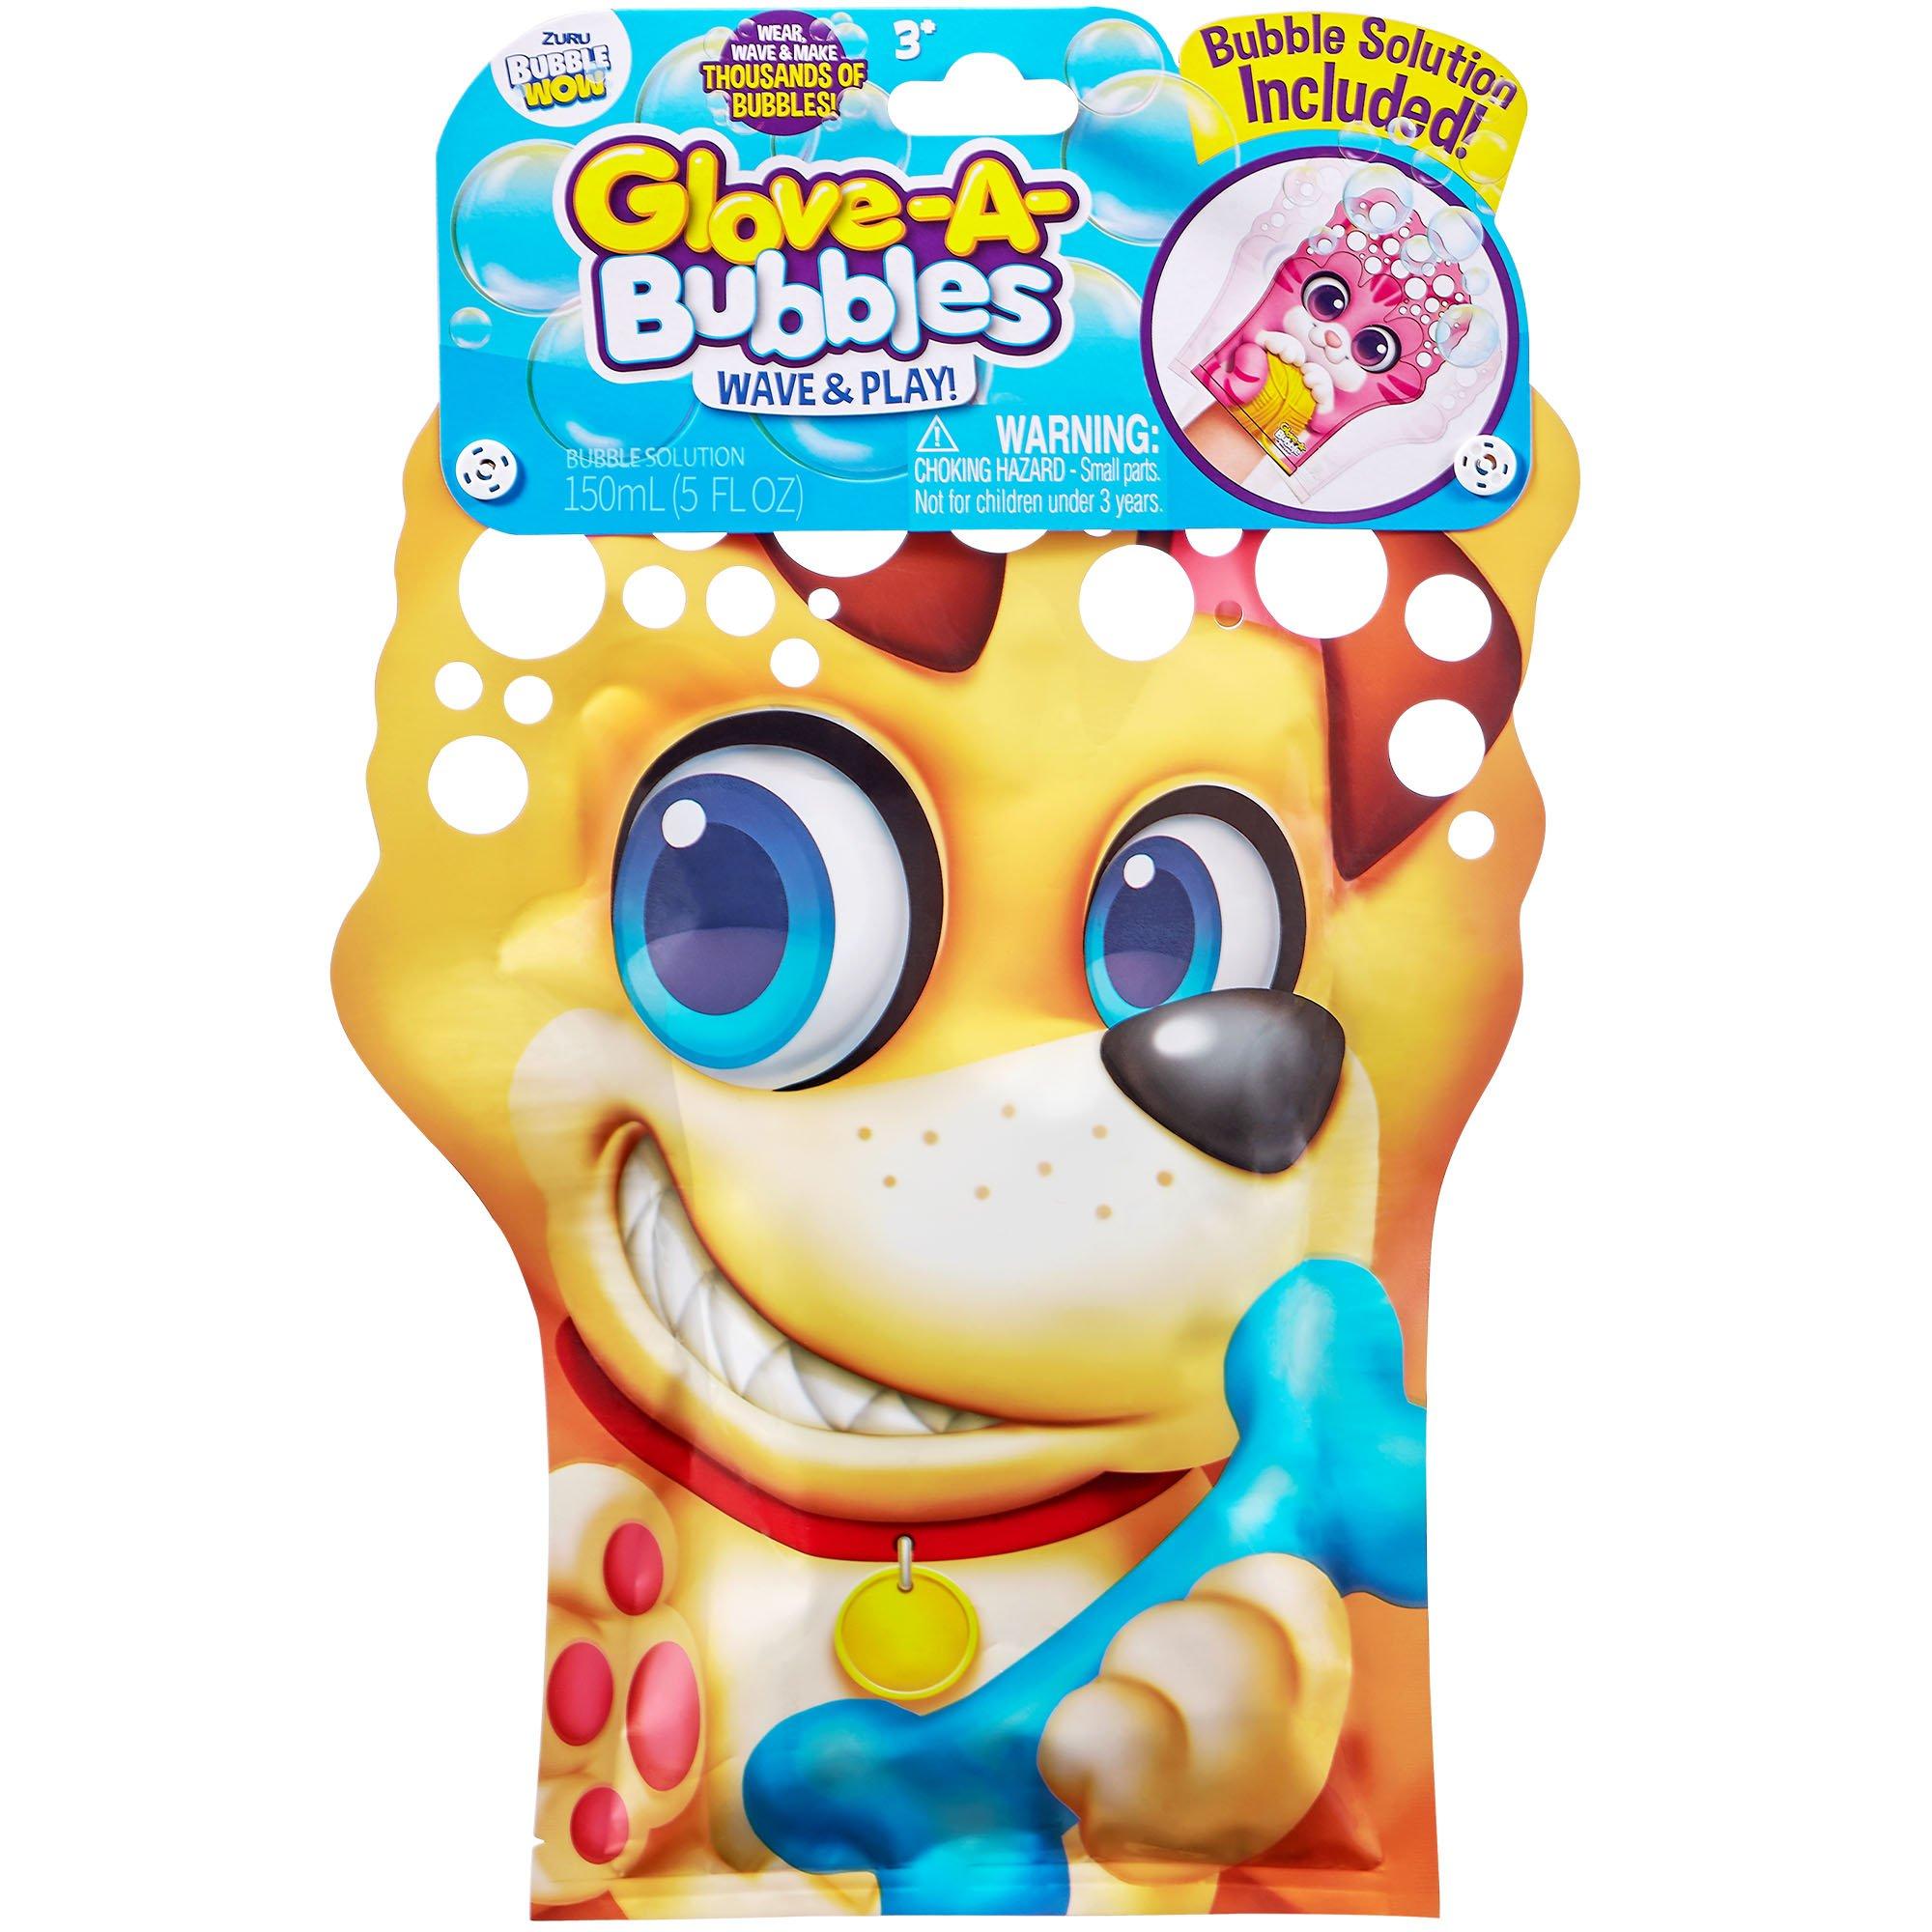 Bubble Wow Glove-A-Bubbles Wave & Play with Bubble Solution